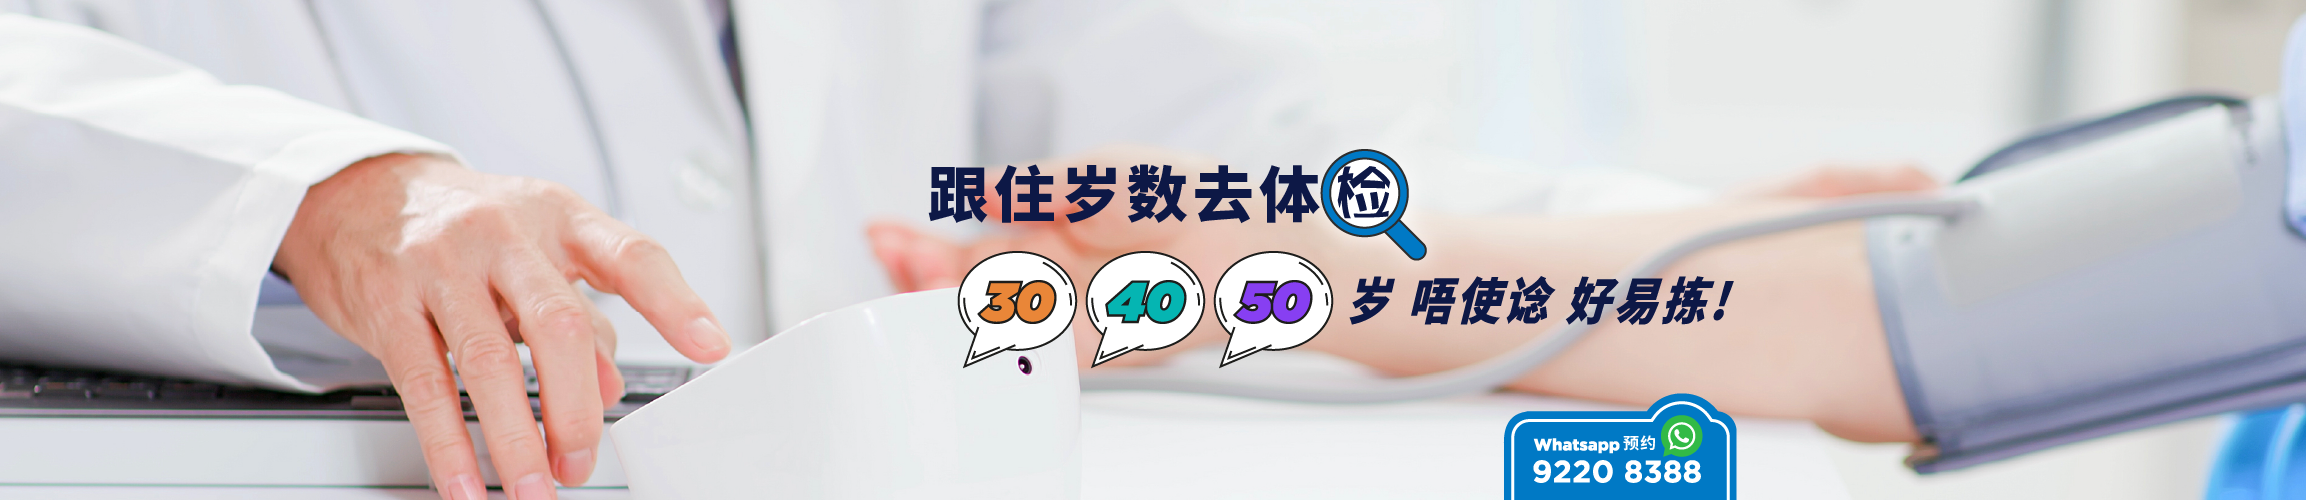 Health Screenings by Age banner_simplified Chinese